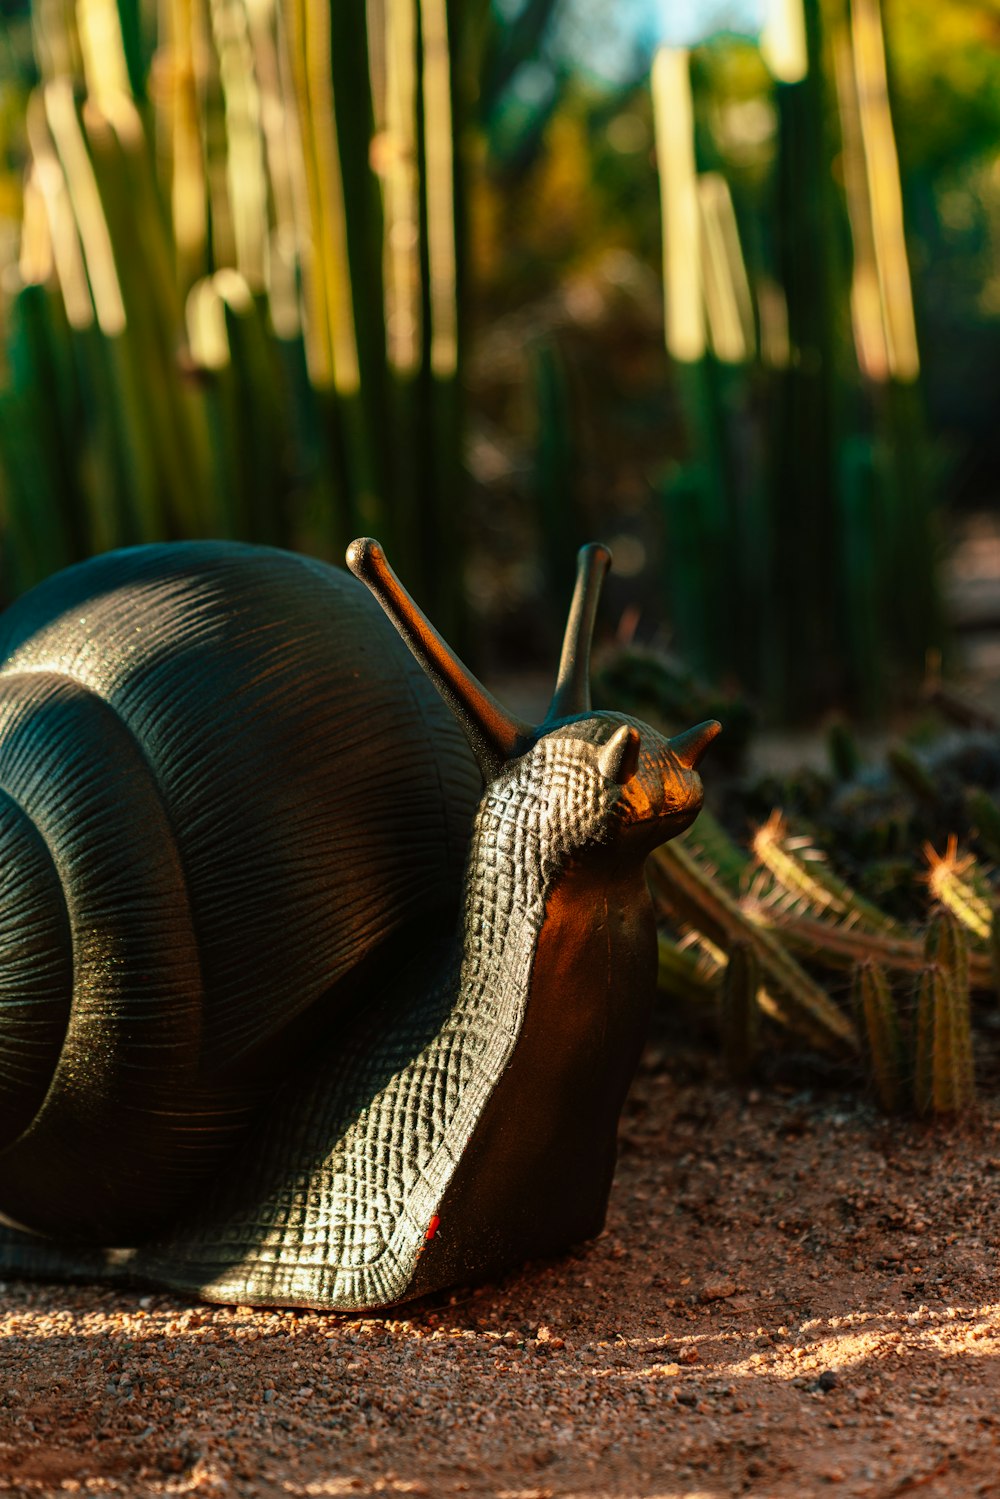 snail figure by plant during daytime